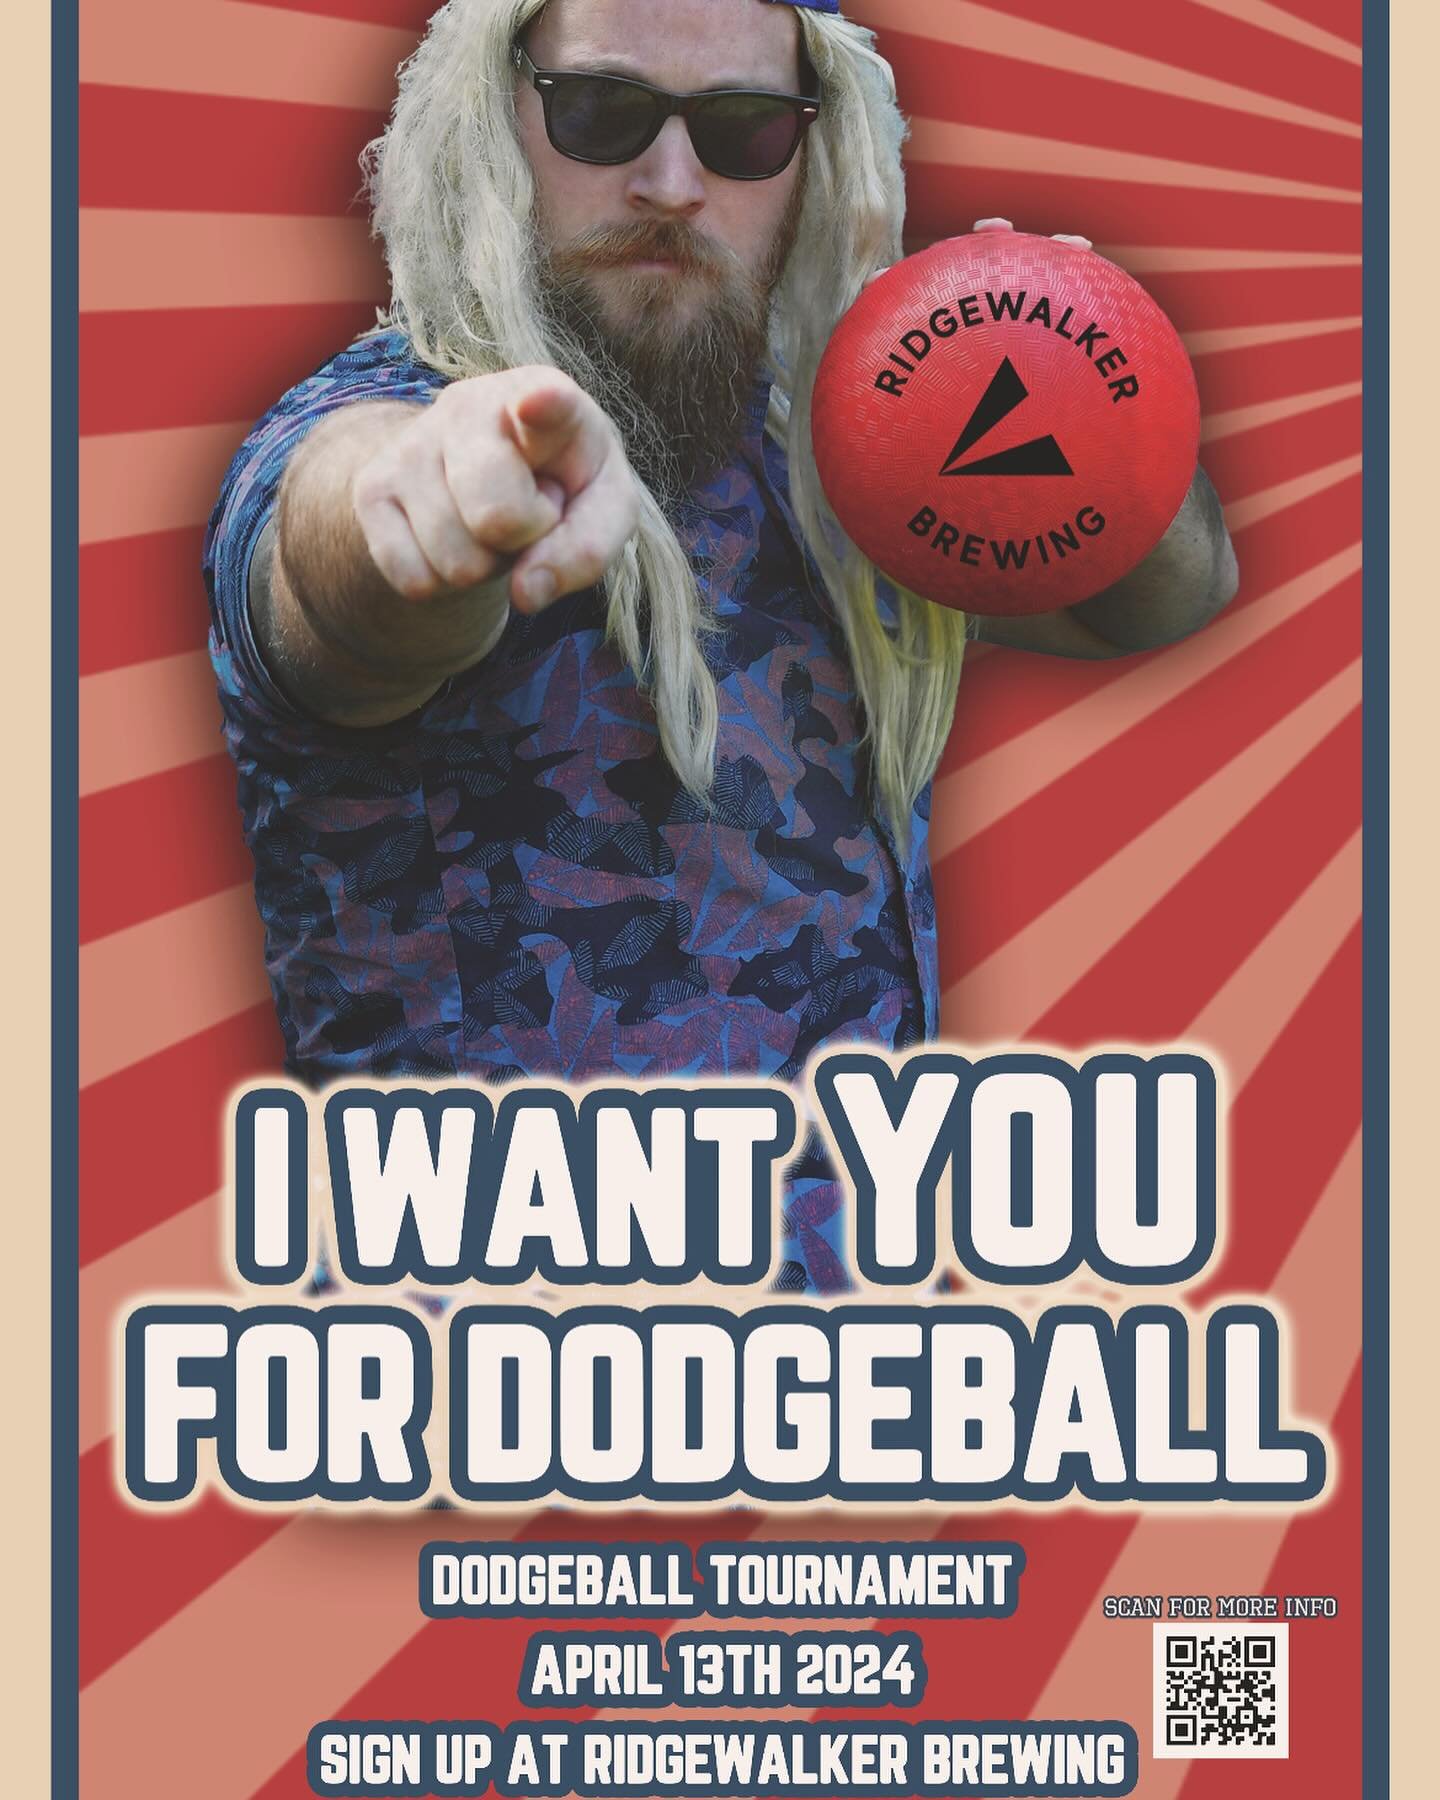 ☄️Dodgeball tournament starts at 5pm!

☄️ It&rsquo;s not too late to sign up, you can do so at the pub or show up at the event. 

☄️ Don&rsquo;t forget, anyone is welcome to show up and just enjoy the show!

🍺 We&rsquo;ll be serving our Dodgeball Ko